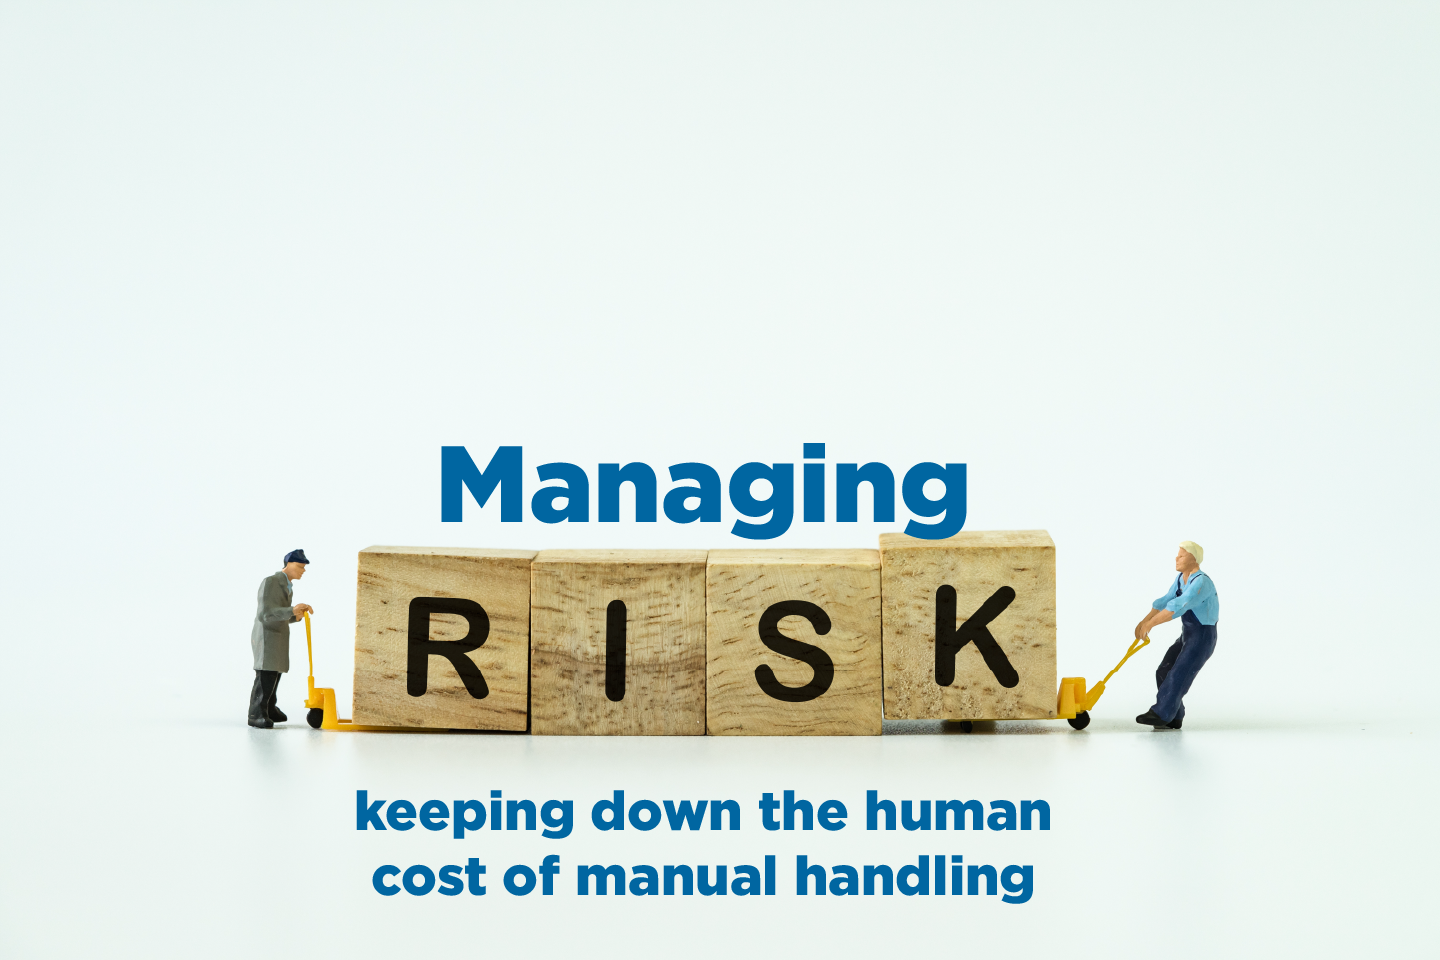 Managing risk - keeping down the human cost of manual handling